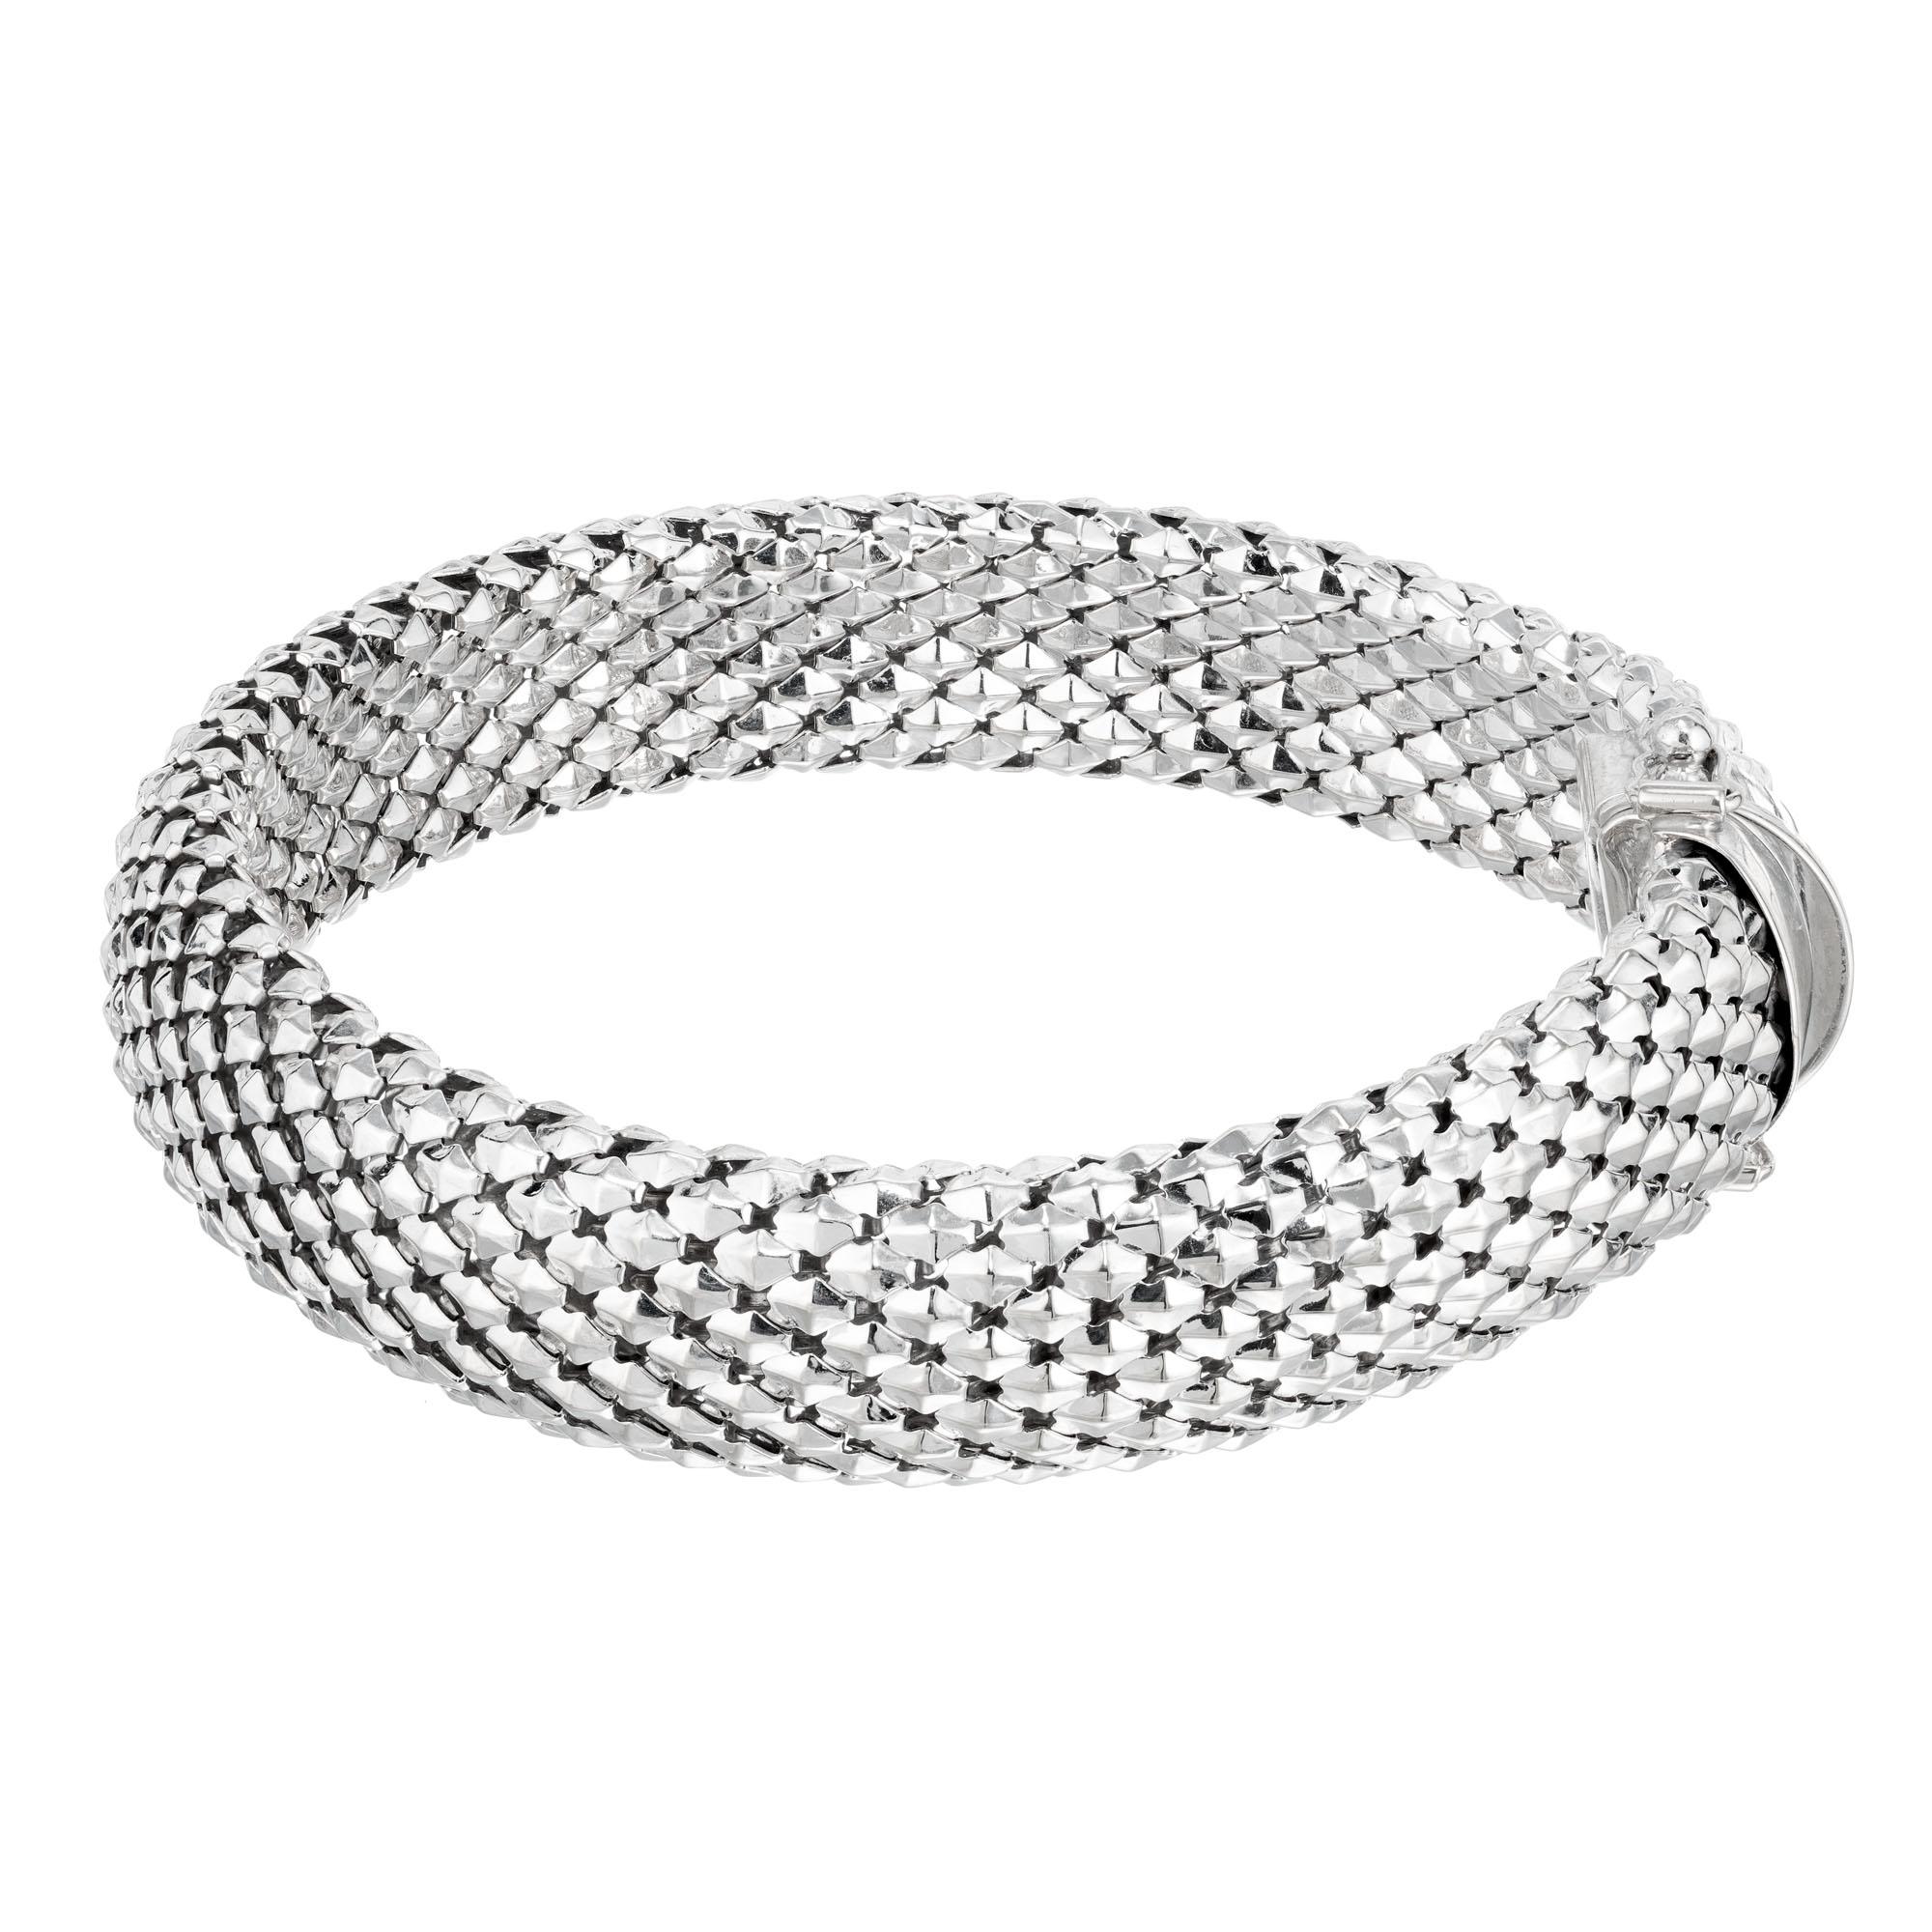 Domed shiny weaved 14k white gold bracelet with double side lock and double figure 8 safety. 7.5 Inches long. The intricate weave design showcases intricate craftsmanship, making it a timeless and versatile accessory. 

14k white gold 
Stamped: